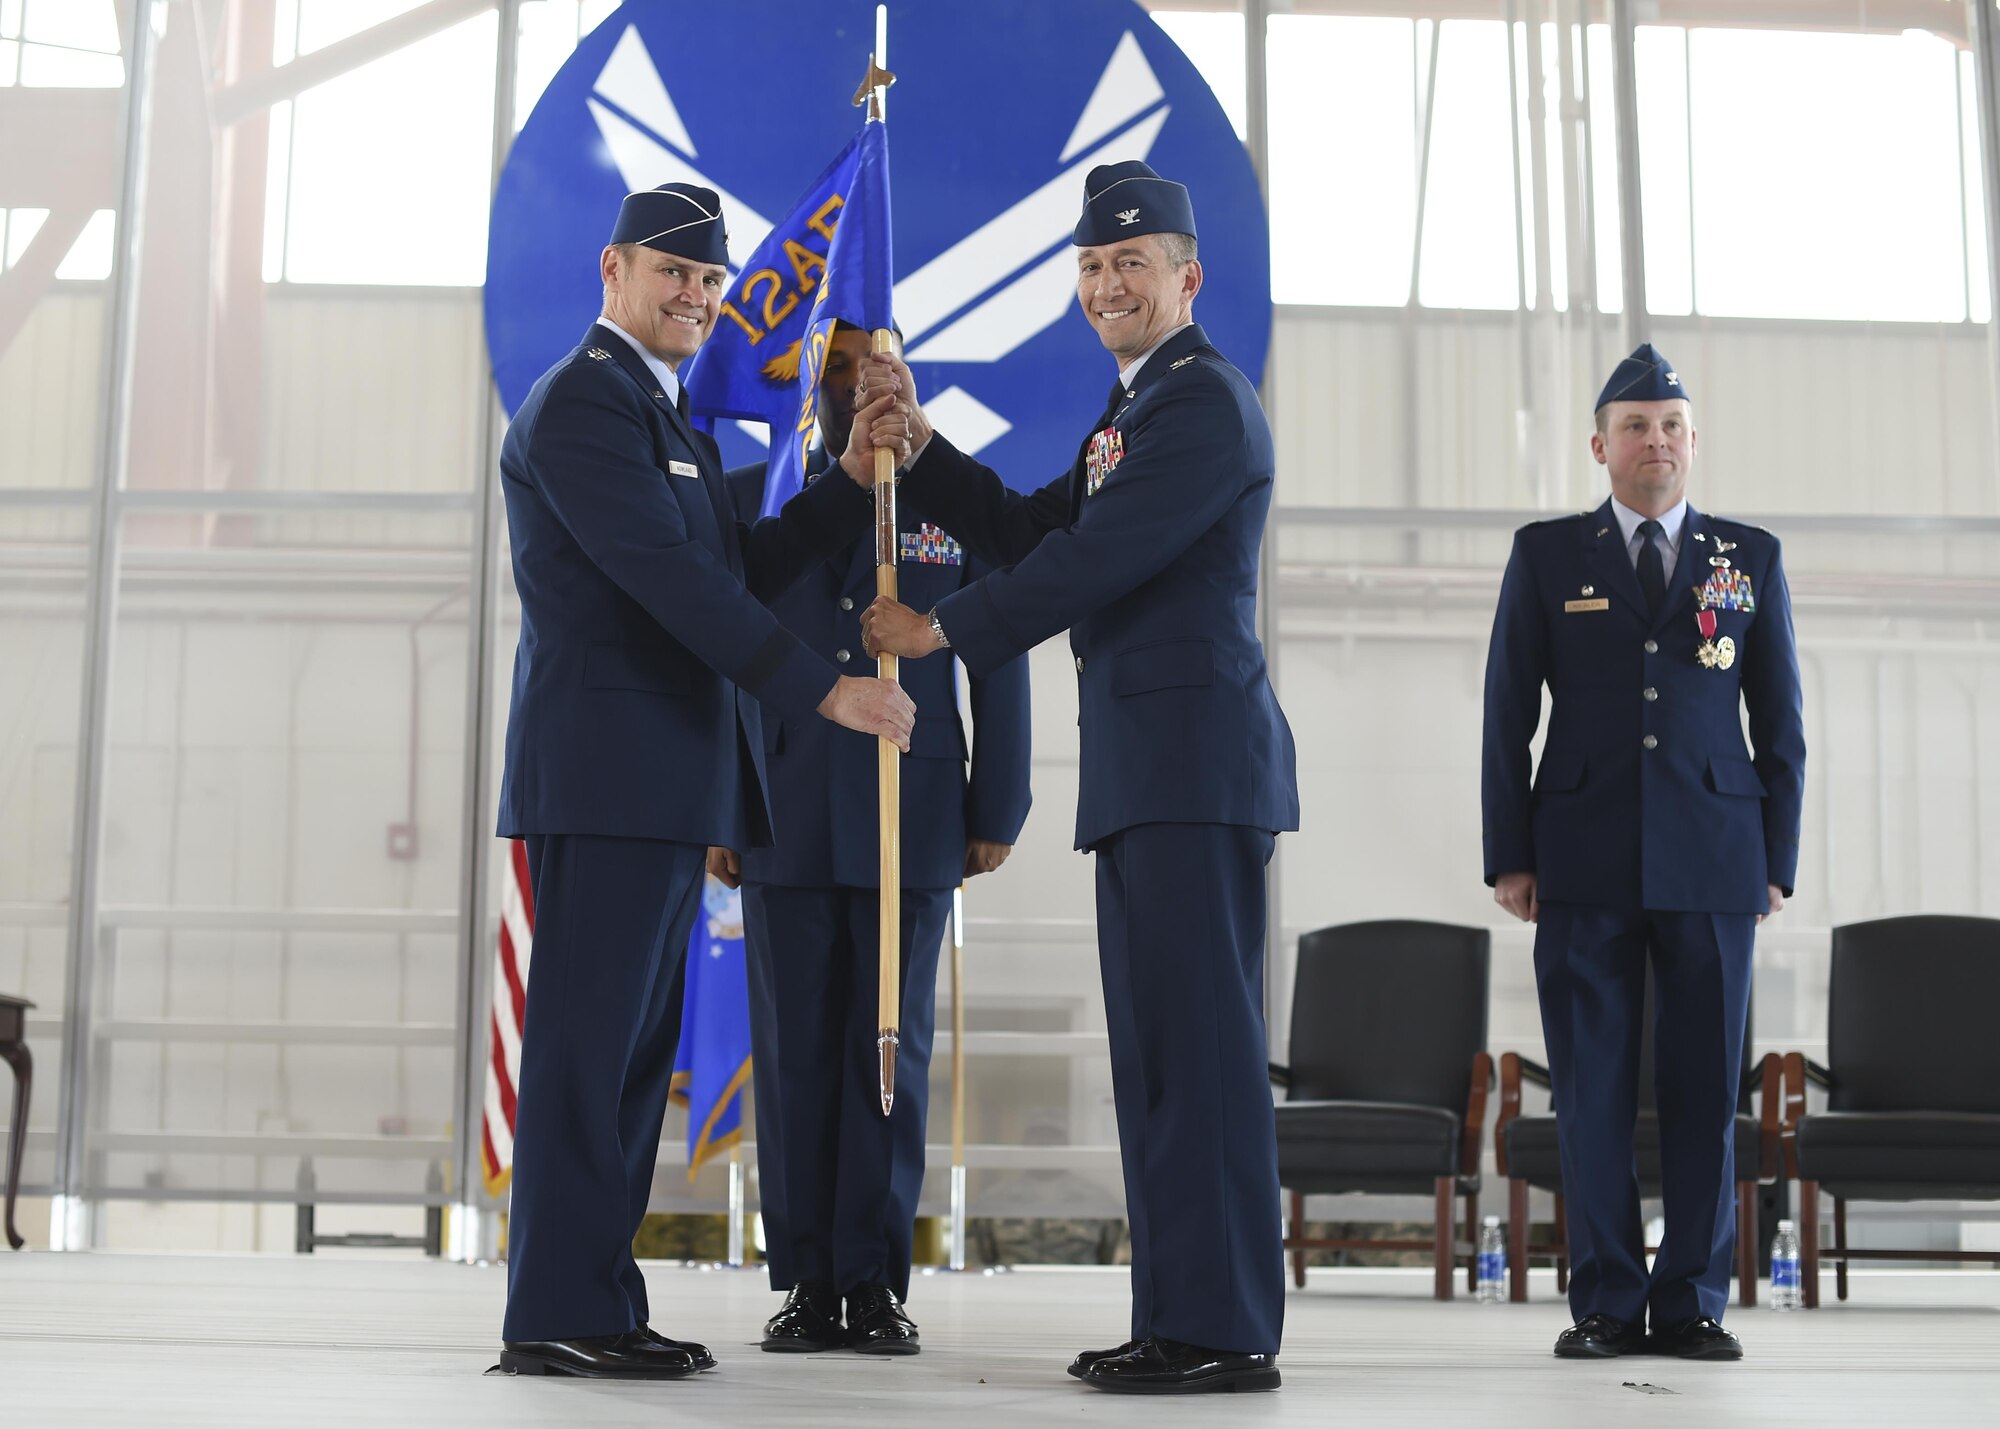 Col. Houston Cantwell, the 49th Wing commander revives the 49th Wing gidon from Lt. Gen. Mark Nowland the 12th Air Force commander during a change-of-command ceremony July 15 at Hangar 500 at Holloman Air Force Base N.M. Col. Houston Cantwell assumed command of the 49th Wing and Holloman Air Force Base from the previous commander, Col. Robert Kiebler. As commander of the 49th Wing, Cantwell will lead Holloman’s mission to provide combat-ready Airmen, train MQ-1 Predator and MQ-9 Reaper pilots and sensor operators, and hosts the 54th Fighter Group's F-16 Fighting Falcon pilot training mission, the 96th Test Group's high-speed test track mission and the German Air Force Flying Training Center. (U.S. Air Force Photo by: Staff Sgt. Stacy Moless)